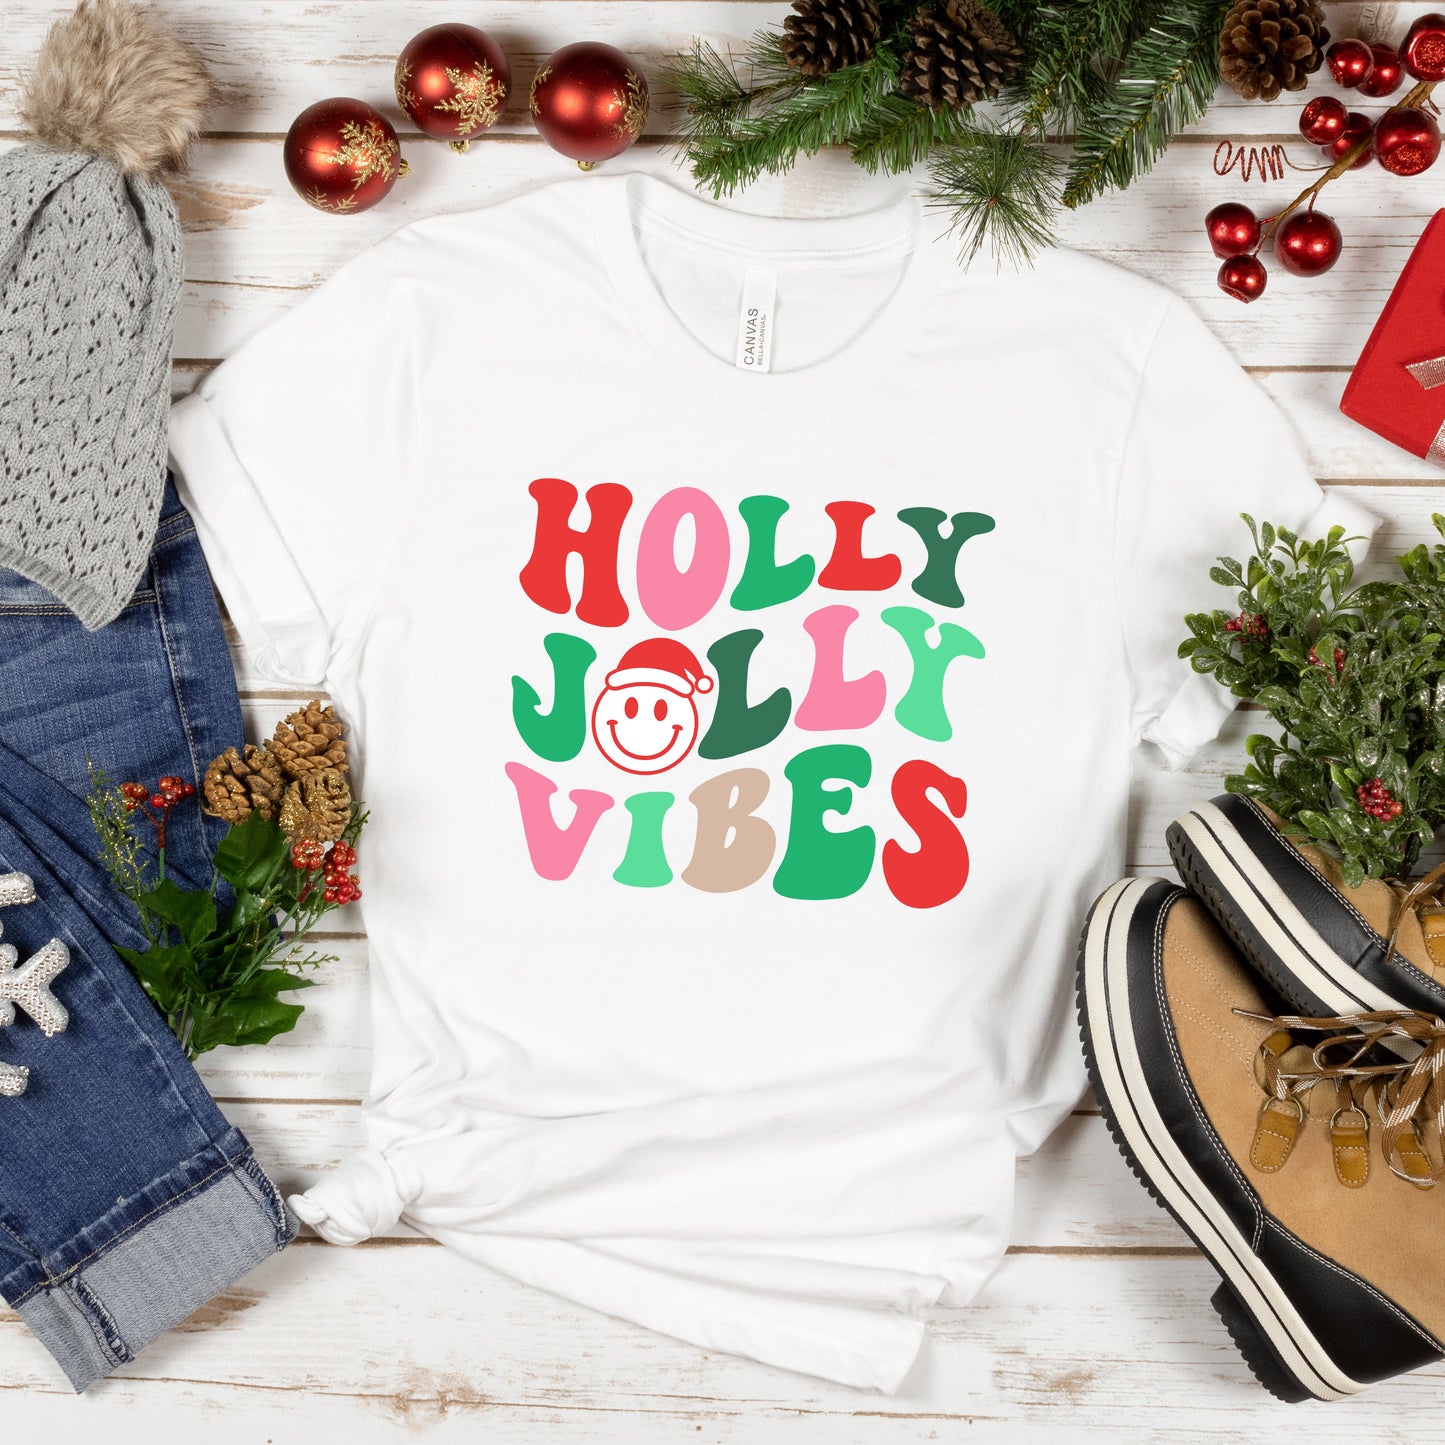 Holly Jolly Vibes Smile | Short Sleeve Crew Neck